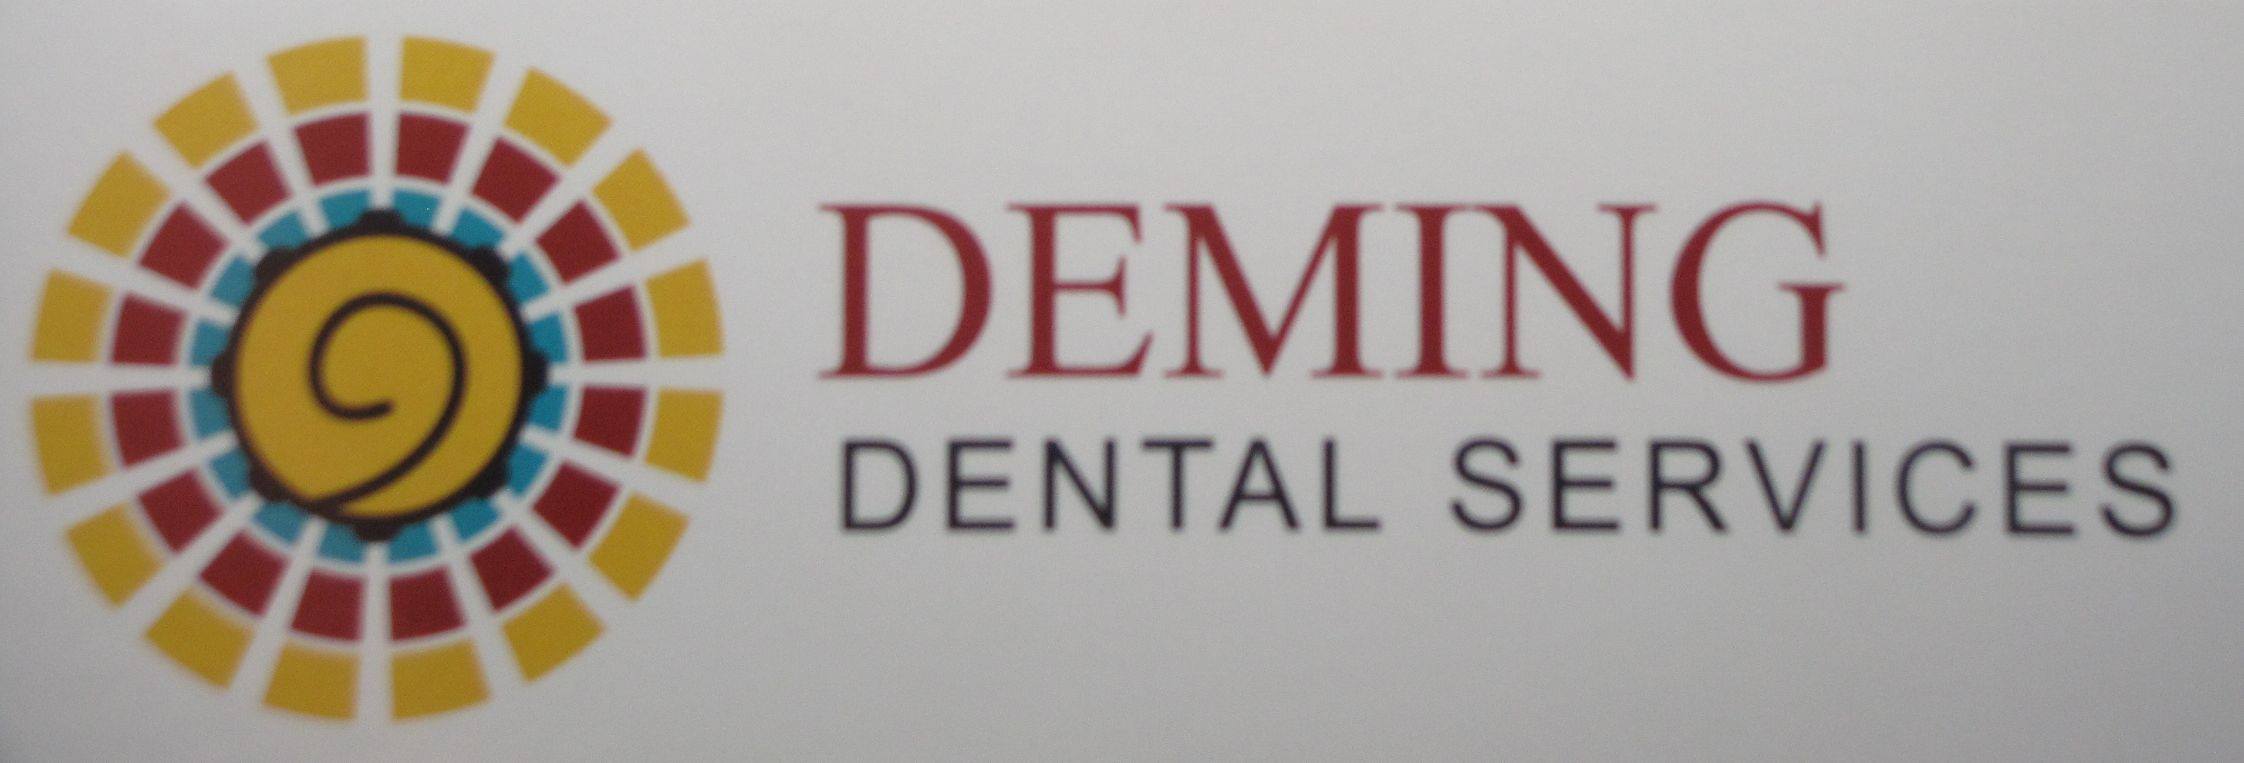 Deming Dental Services 400 S Gold Ave, Deming New Mexico 88030